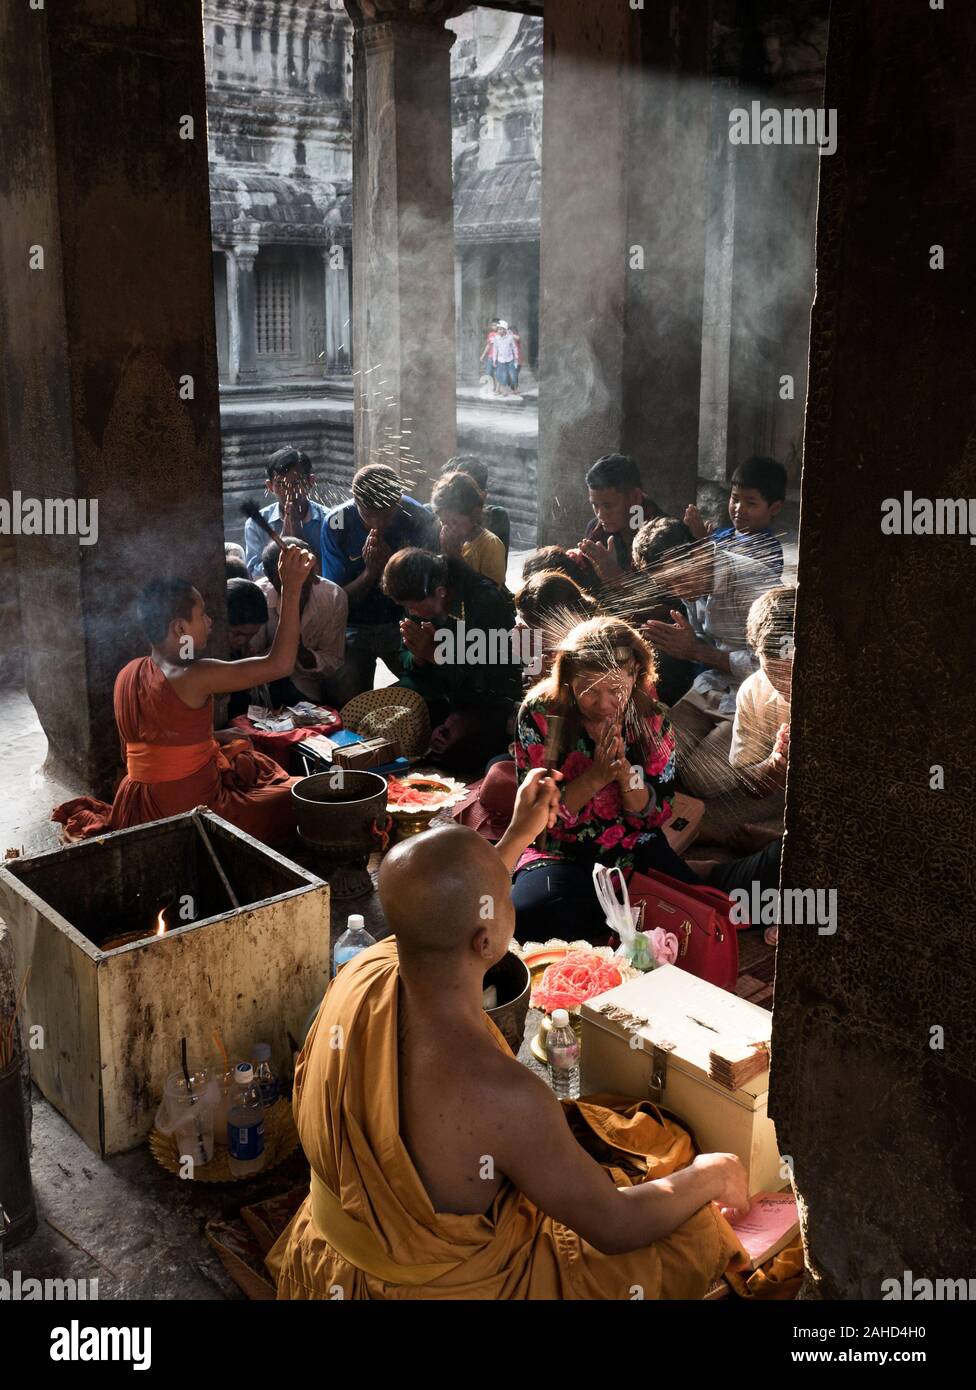 Picture of blessing ceremony with of Buddhist monk splashing holy water believer's heads on Visak Bochea day (Budda's birth), Angkor Wat, Cambodia Stock Photo